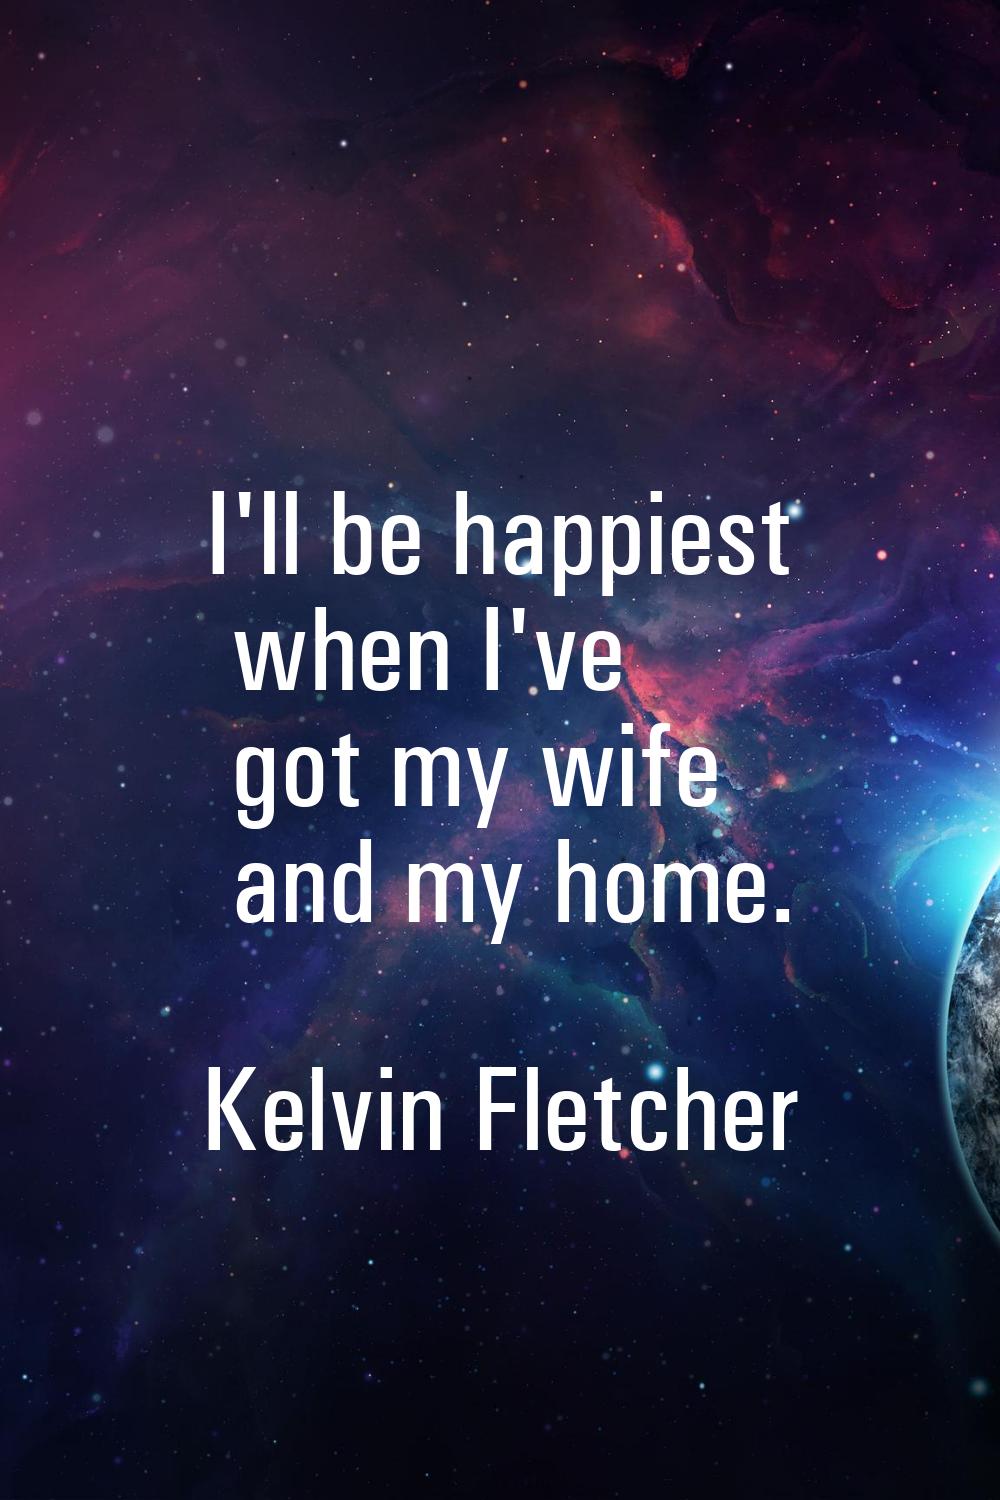 I'll be happiest when I've got my wife and my home.